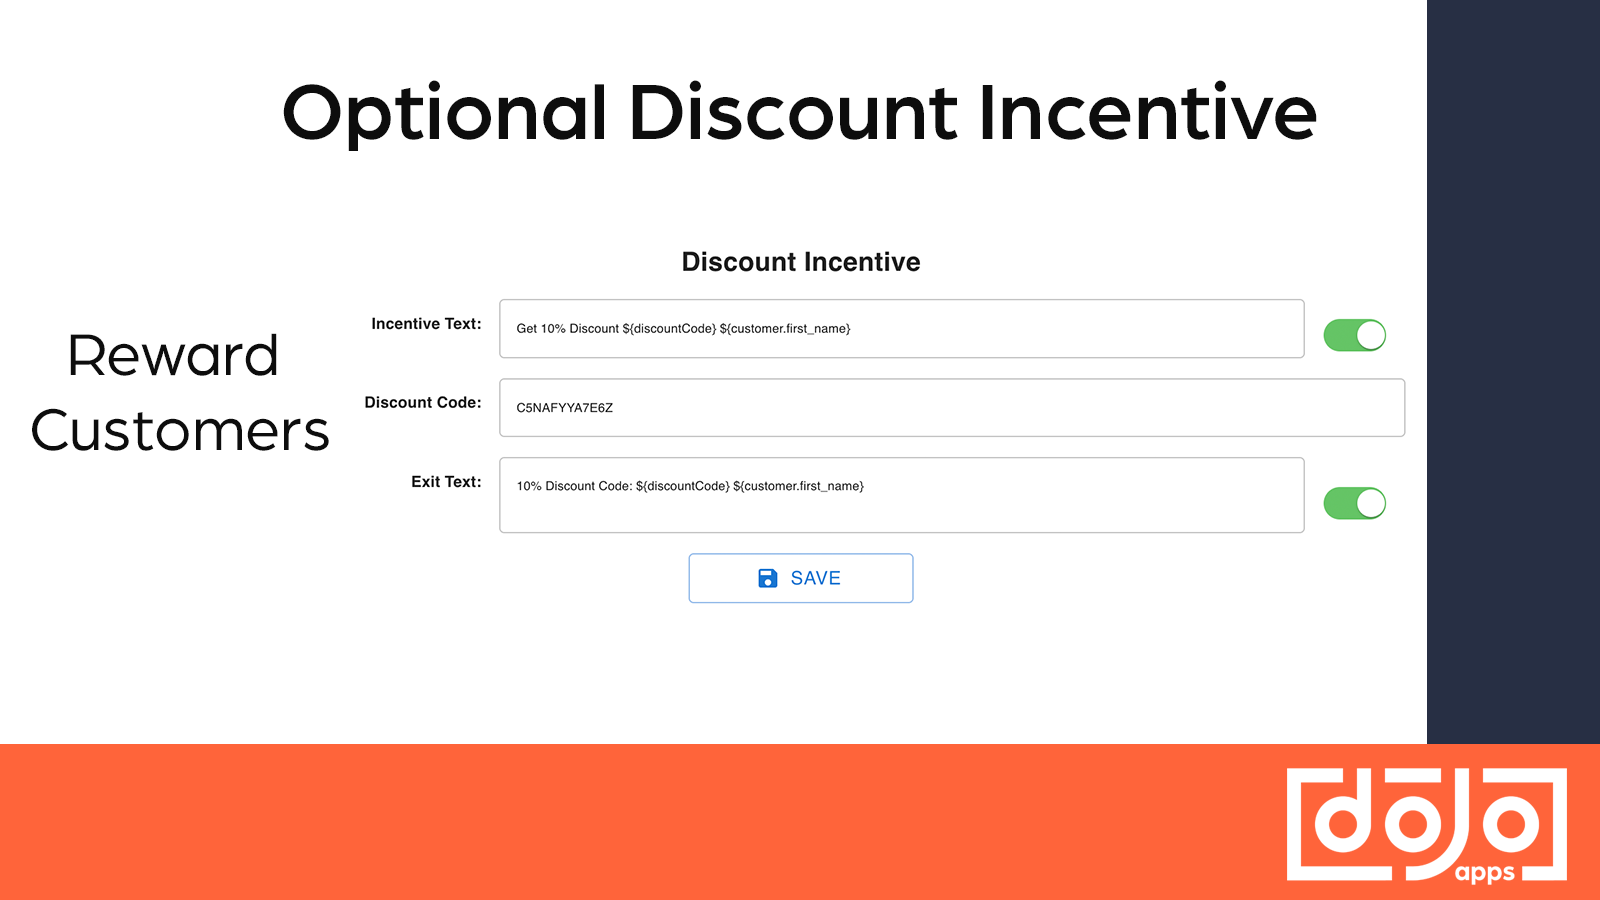 Provide a discount incentive to encourage customer loyalty